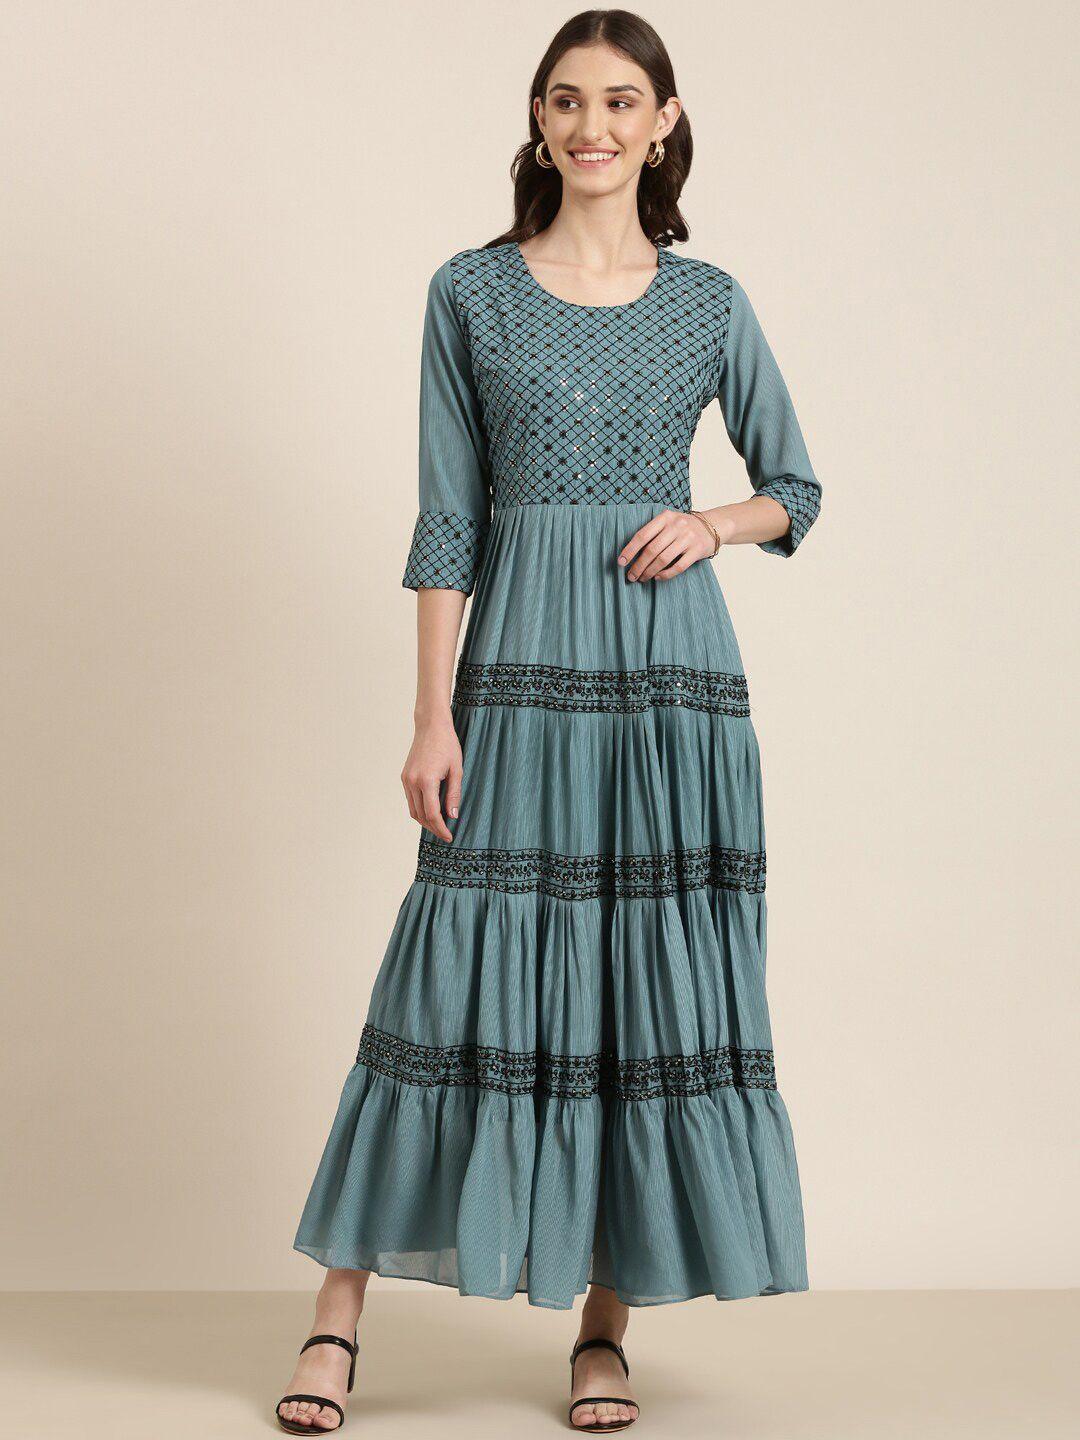 showoff-embellished-round-neck-sequinned-tiered-fit-&-flare-ethnic-dress